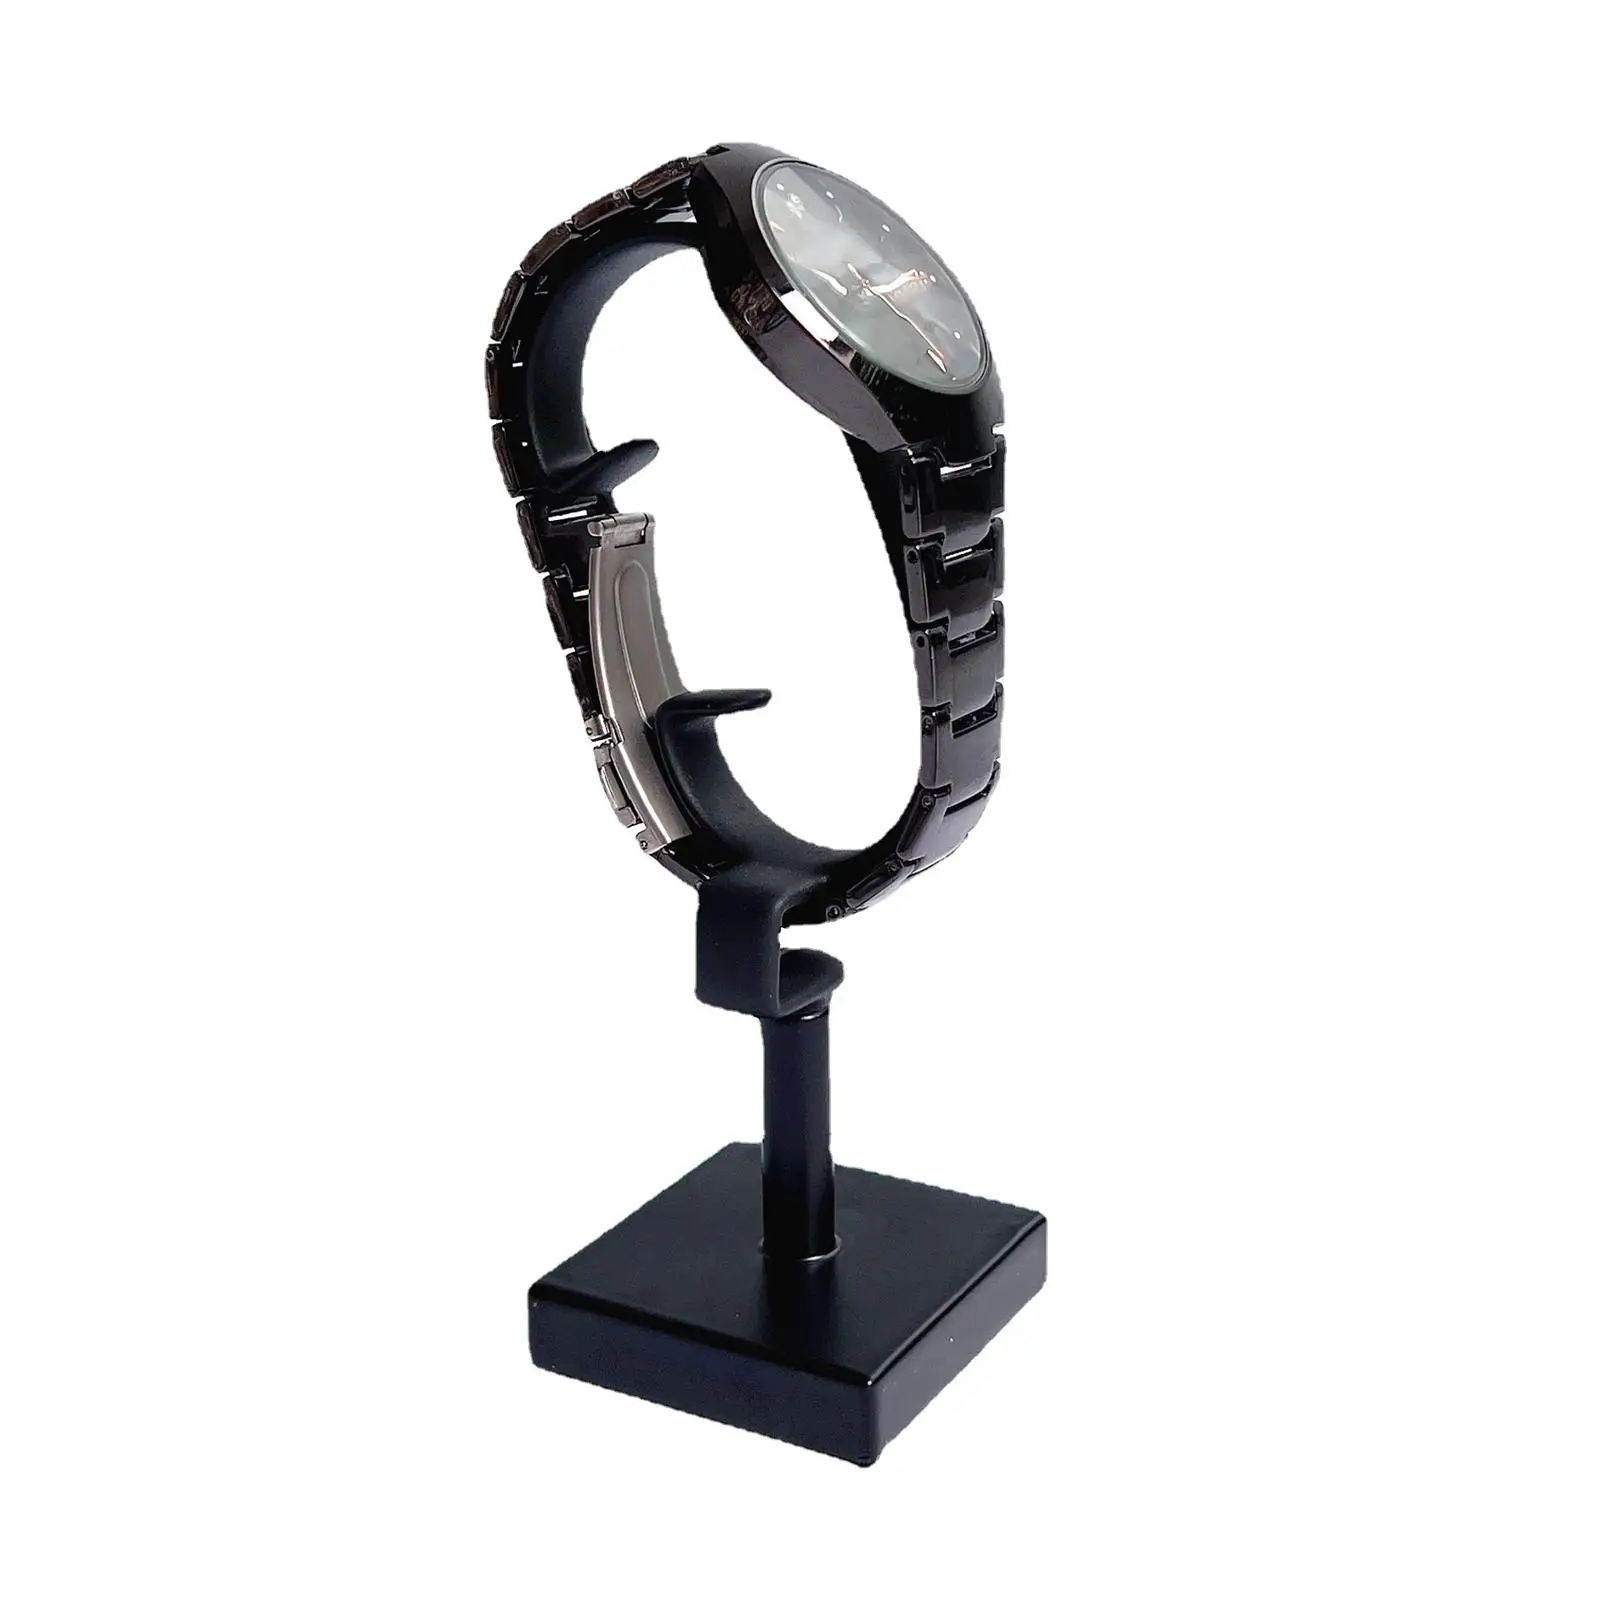 Durable Watch Display Stand Decoration Jewelry Organizer Modern Stable Bracelet Holder for Tabletop Dresser Living Room Showcase